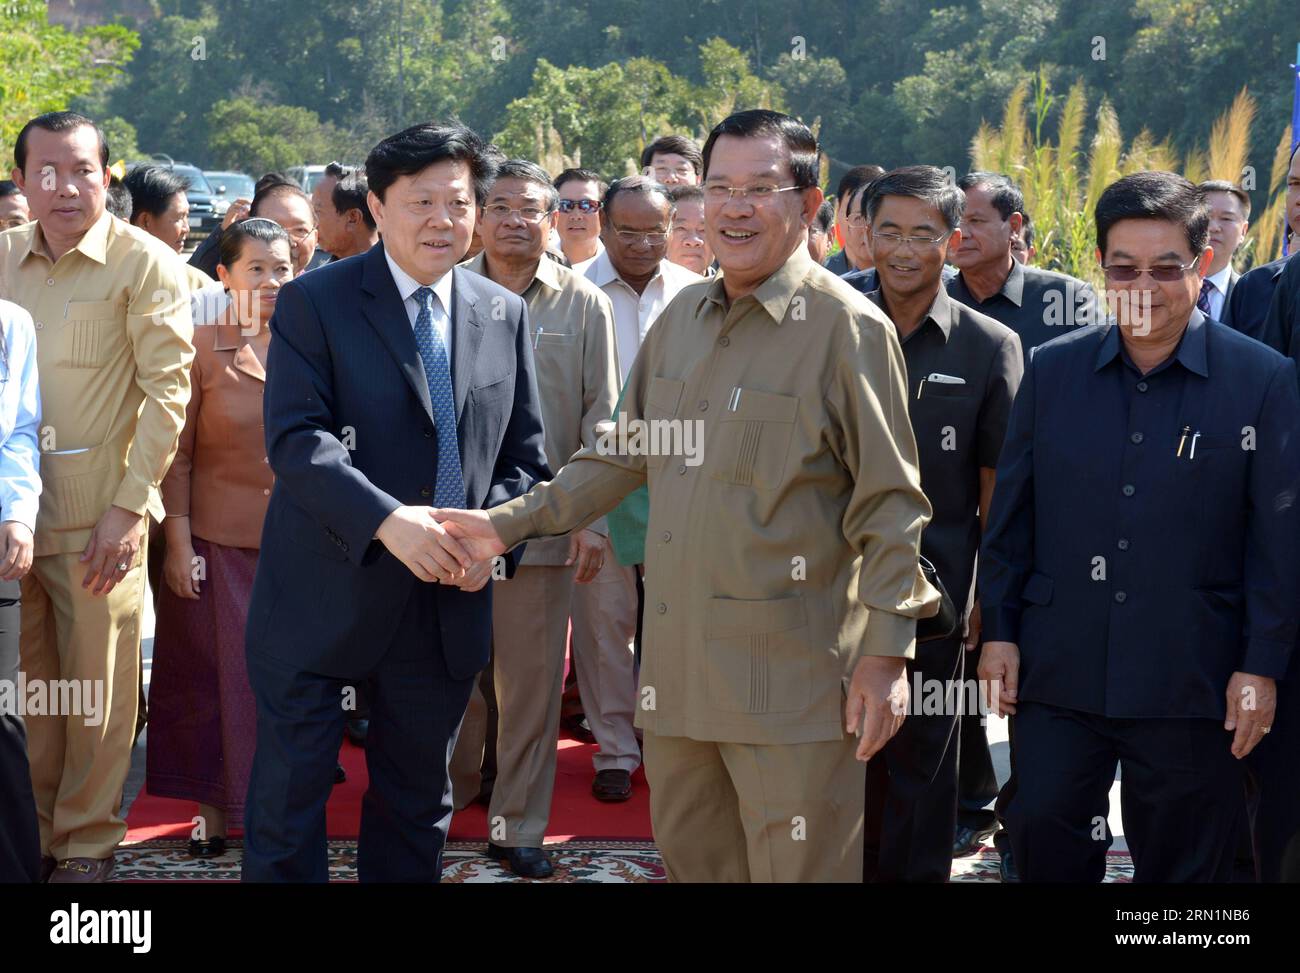 (150112) -- KOH KONG, Jan. 12, 2015 -- Cambodian Prime Minister Hun Sen (R, front) shakes hands with Chairman of the China Huadian Corp Li Qingkui (L, front) in Koh Kong province, Cambodia, Jan. 12, 2015. A Chinese-constructed 338-megawatt Russei Chrum Krom River hydroelectric dam, Cambodia s largest hydropower station so far, commenced operation on Monday after it had been constructed for nearly five years. ) CAMBODIA-KOH KONG-HYDROPOWER DAM-CHINA Sovannara PUBLICATIONxNOTxINxCHN   Koh Kong Jan 12 2015 Cambodian Prime Ministers HUN Sen r Front Shakes Hands With Chairman of The China Huadian C Stock Photo